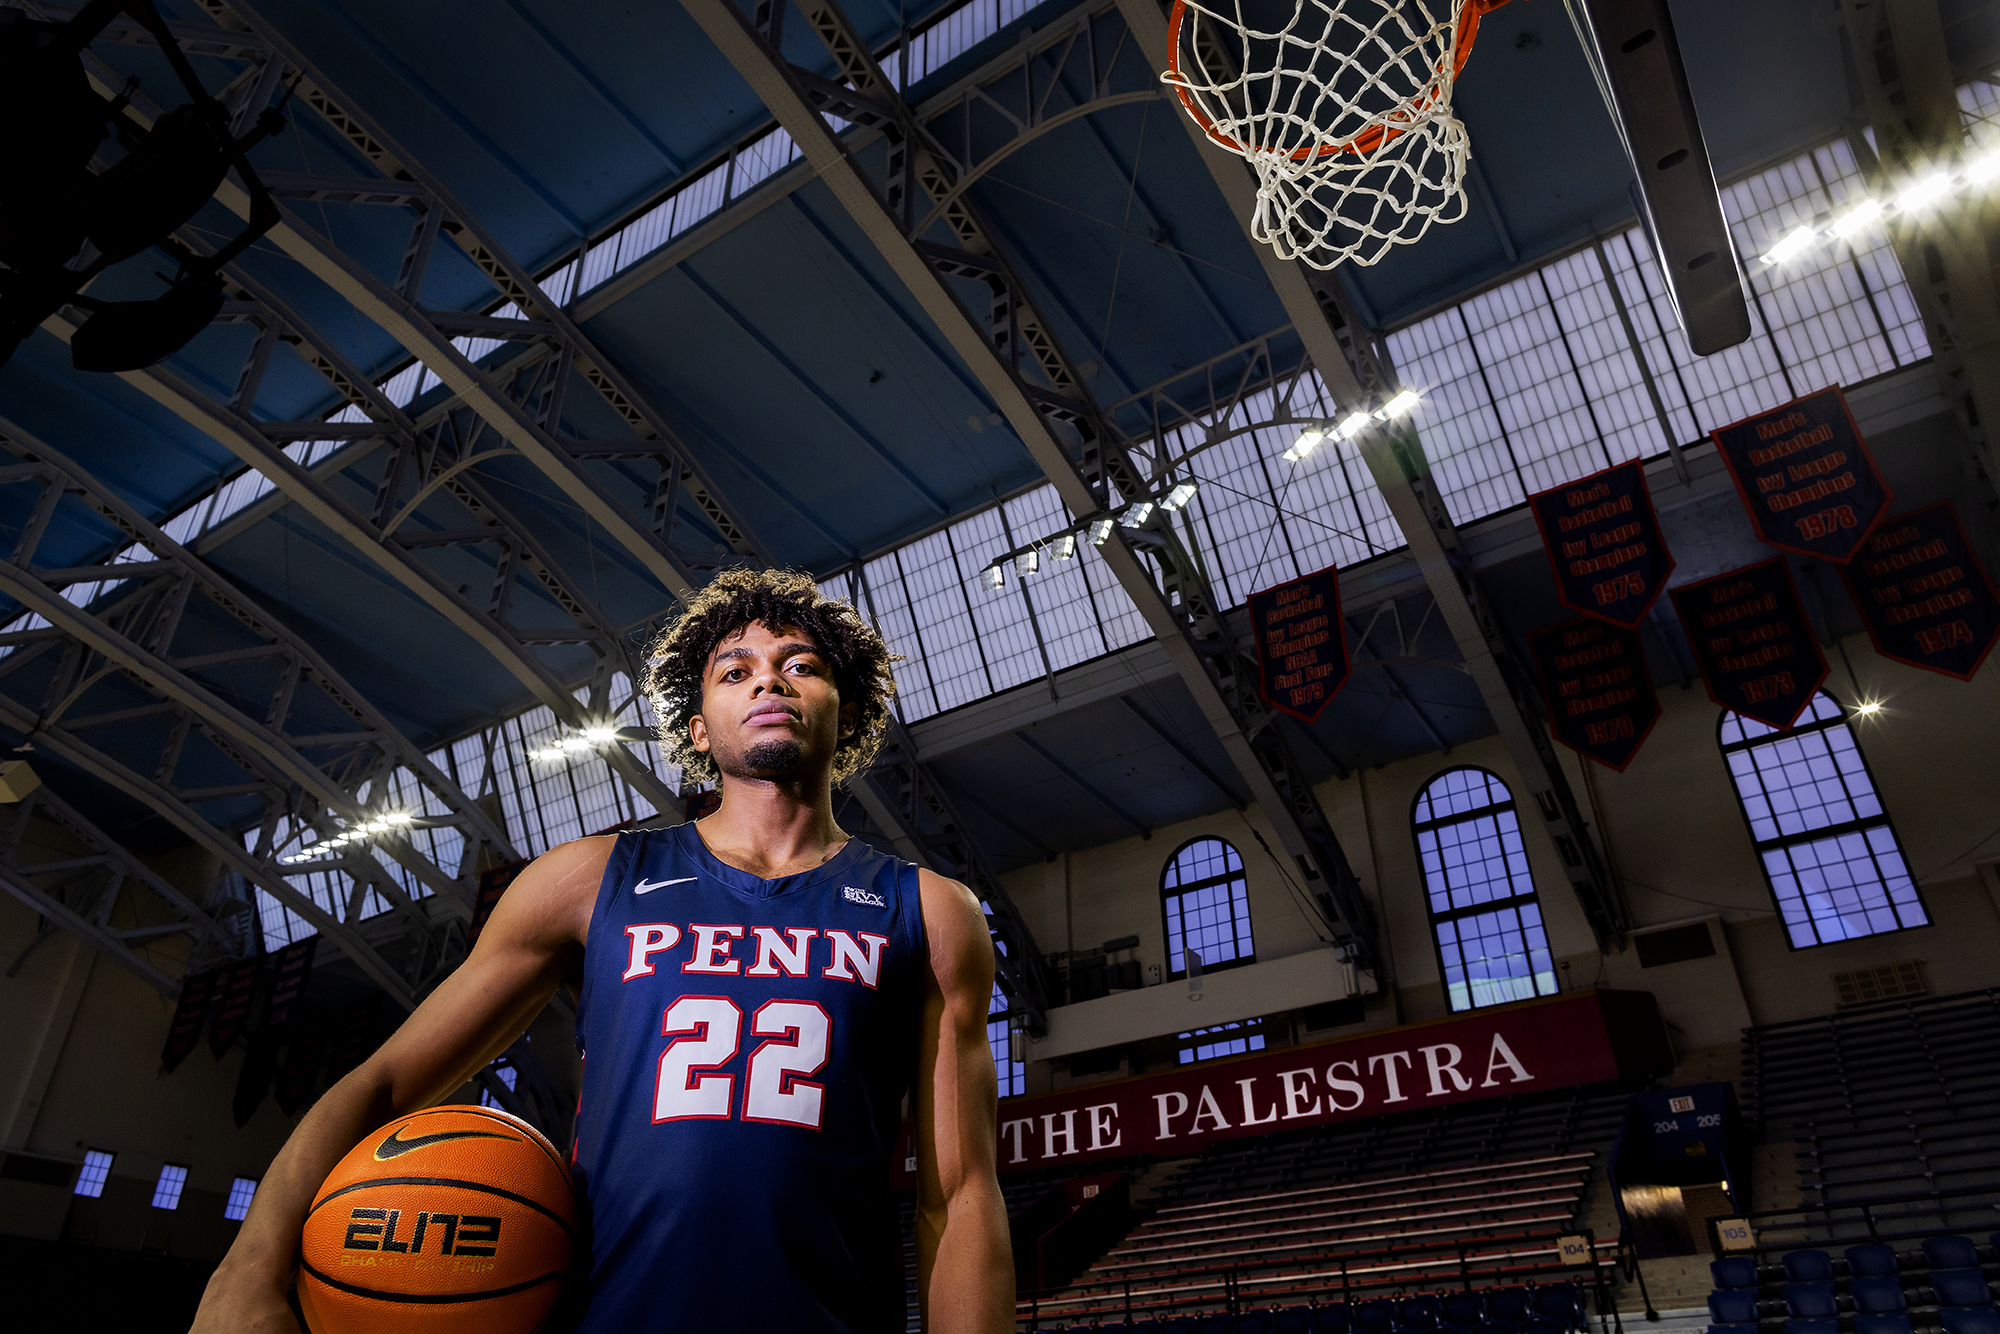 Monroe stands under the basketball hoop at the Palestra holding a basketball in his right arm.